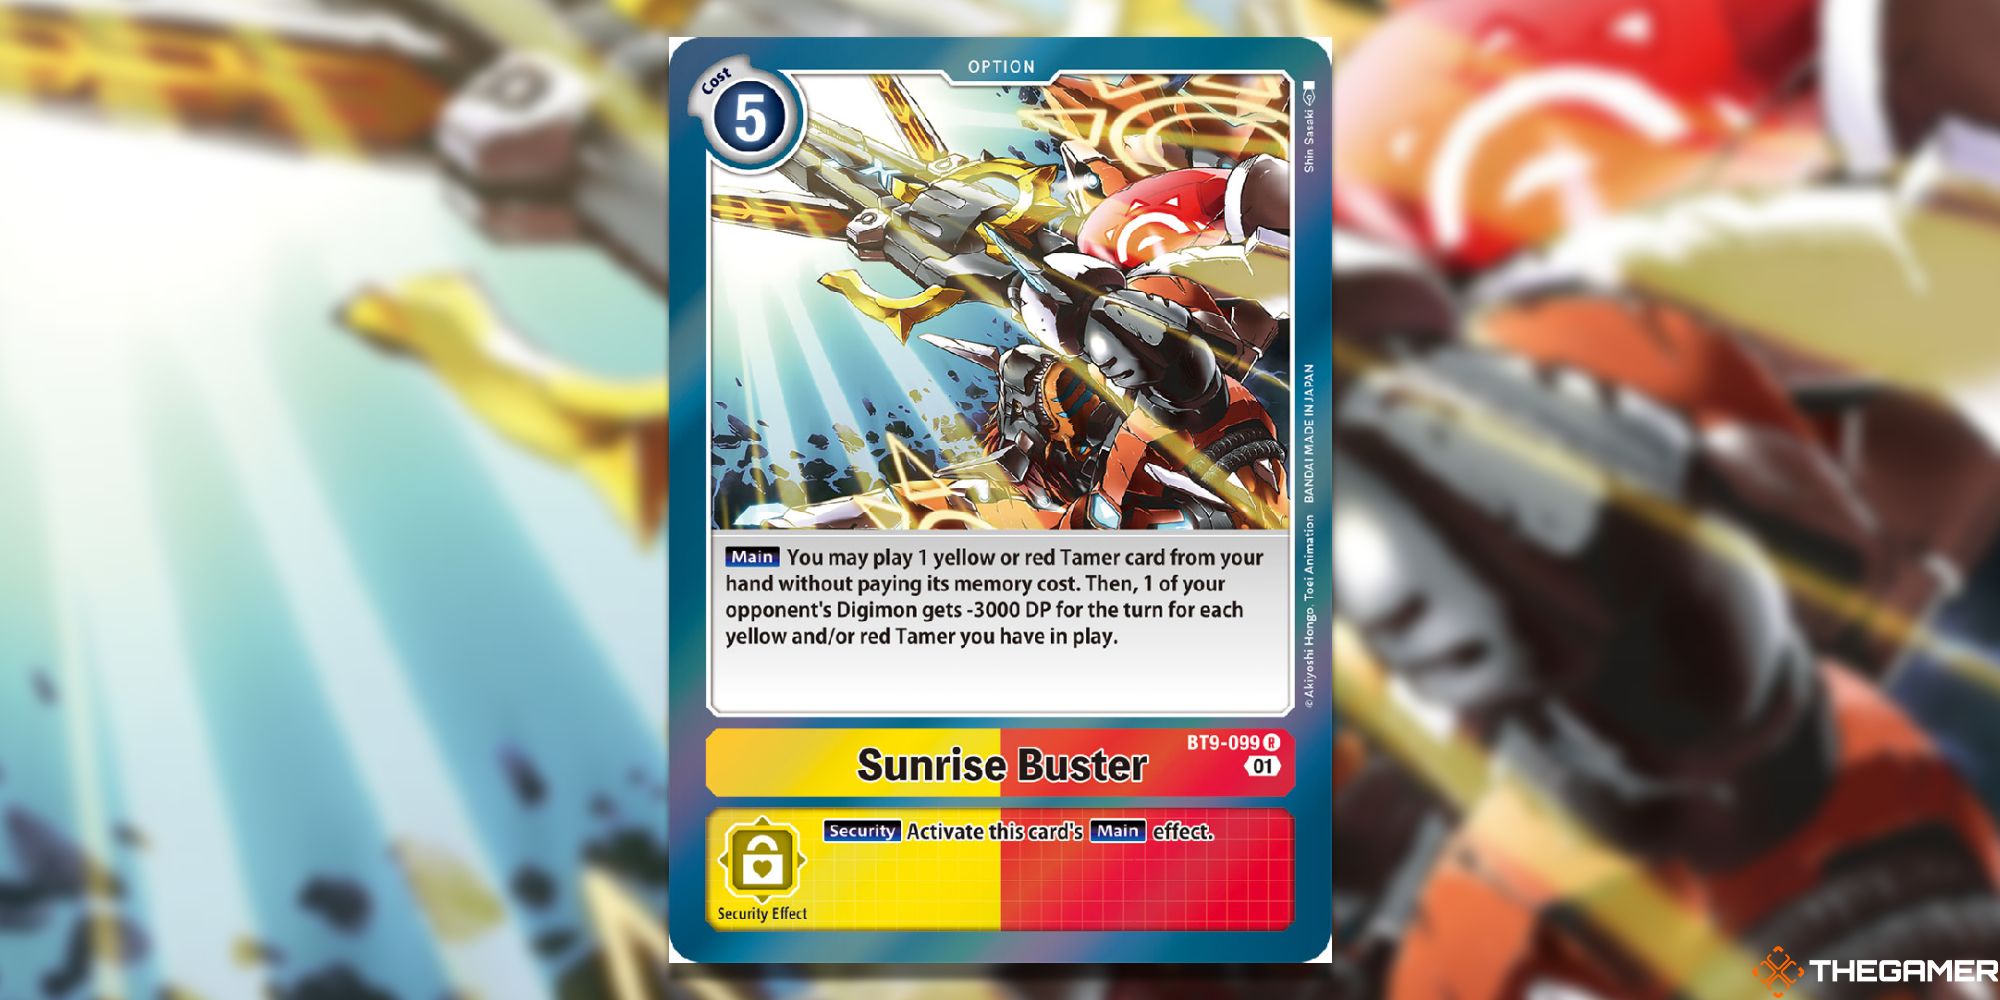 An image of the Sunrise Buster card from Digimon Card Game. 